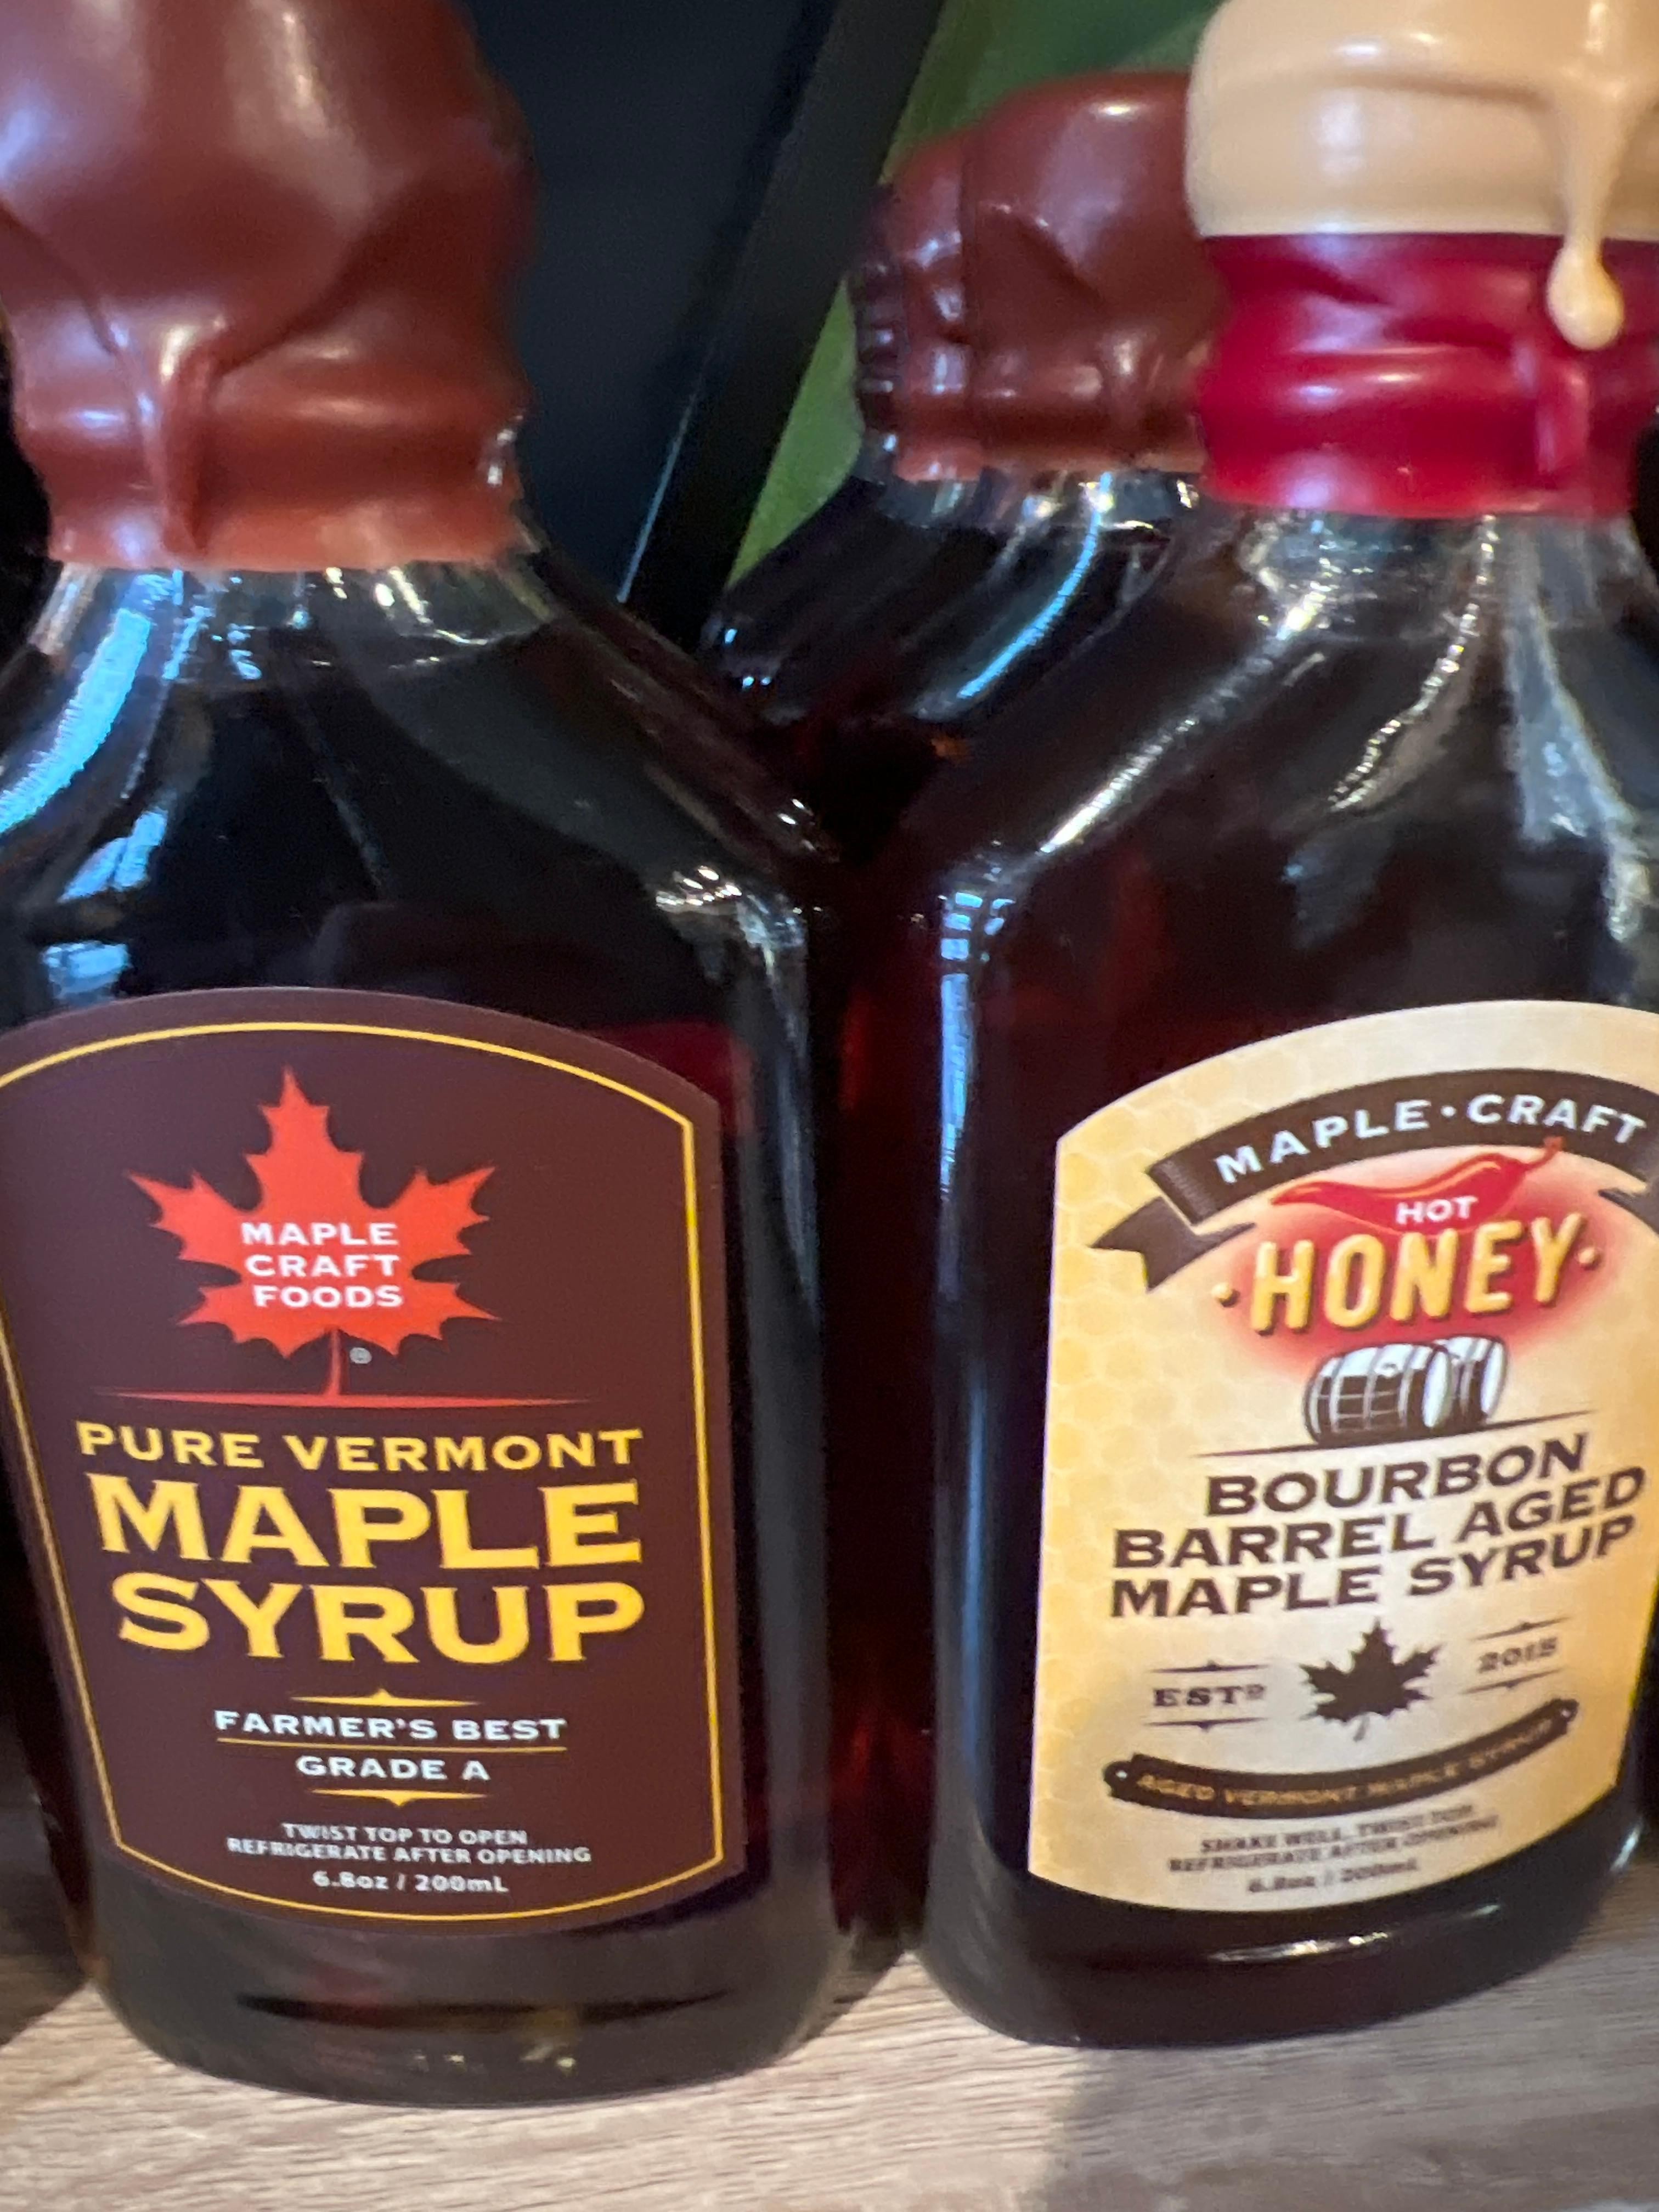 VERMONT MAPLE SYRUP - MAPLE CRAFT